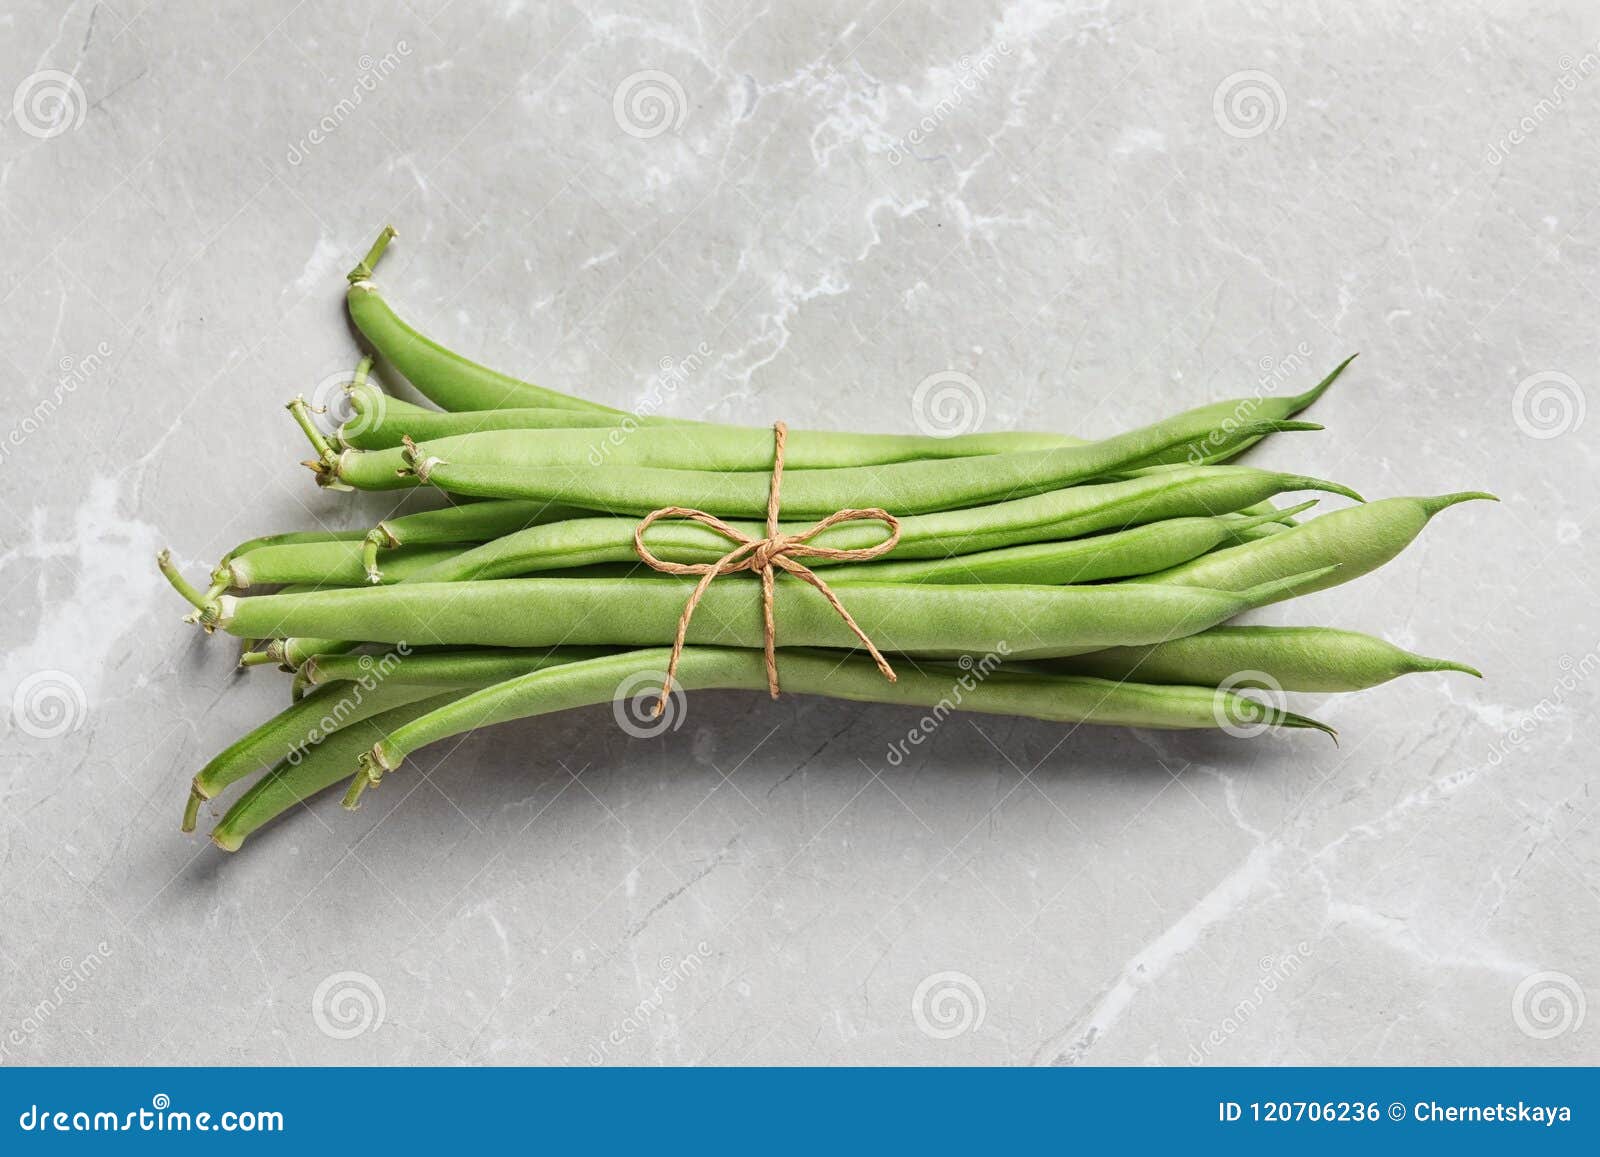 Tied fresh green beans stock photo. Image of diet, food - 120706236